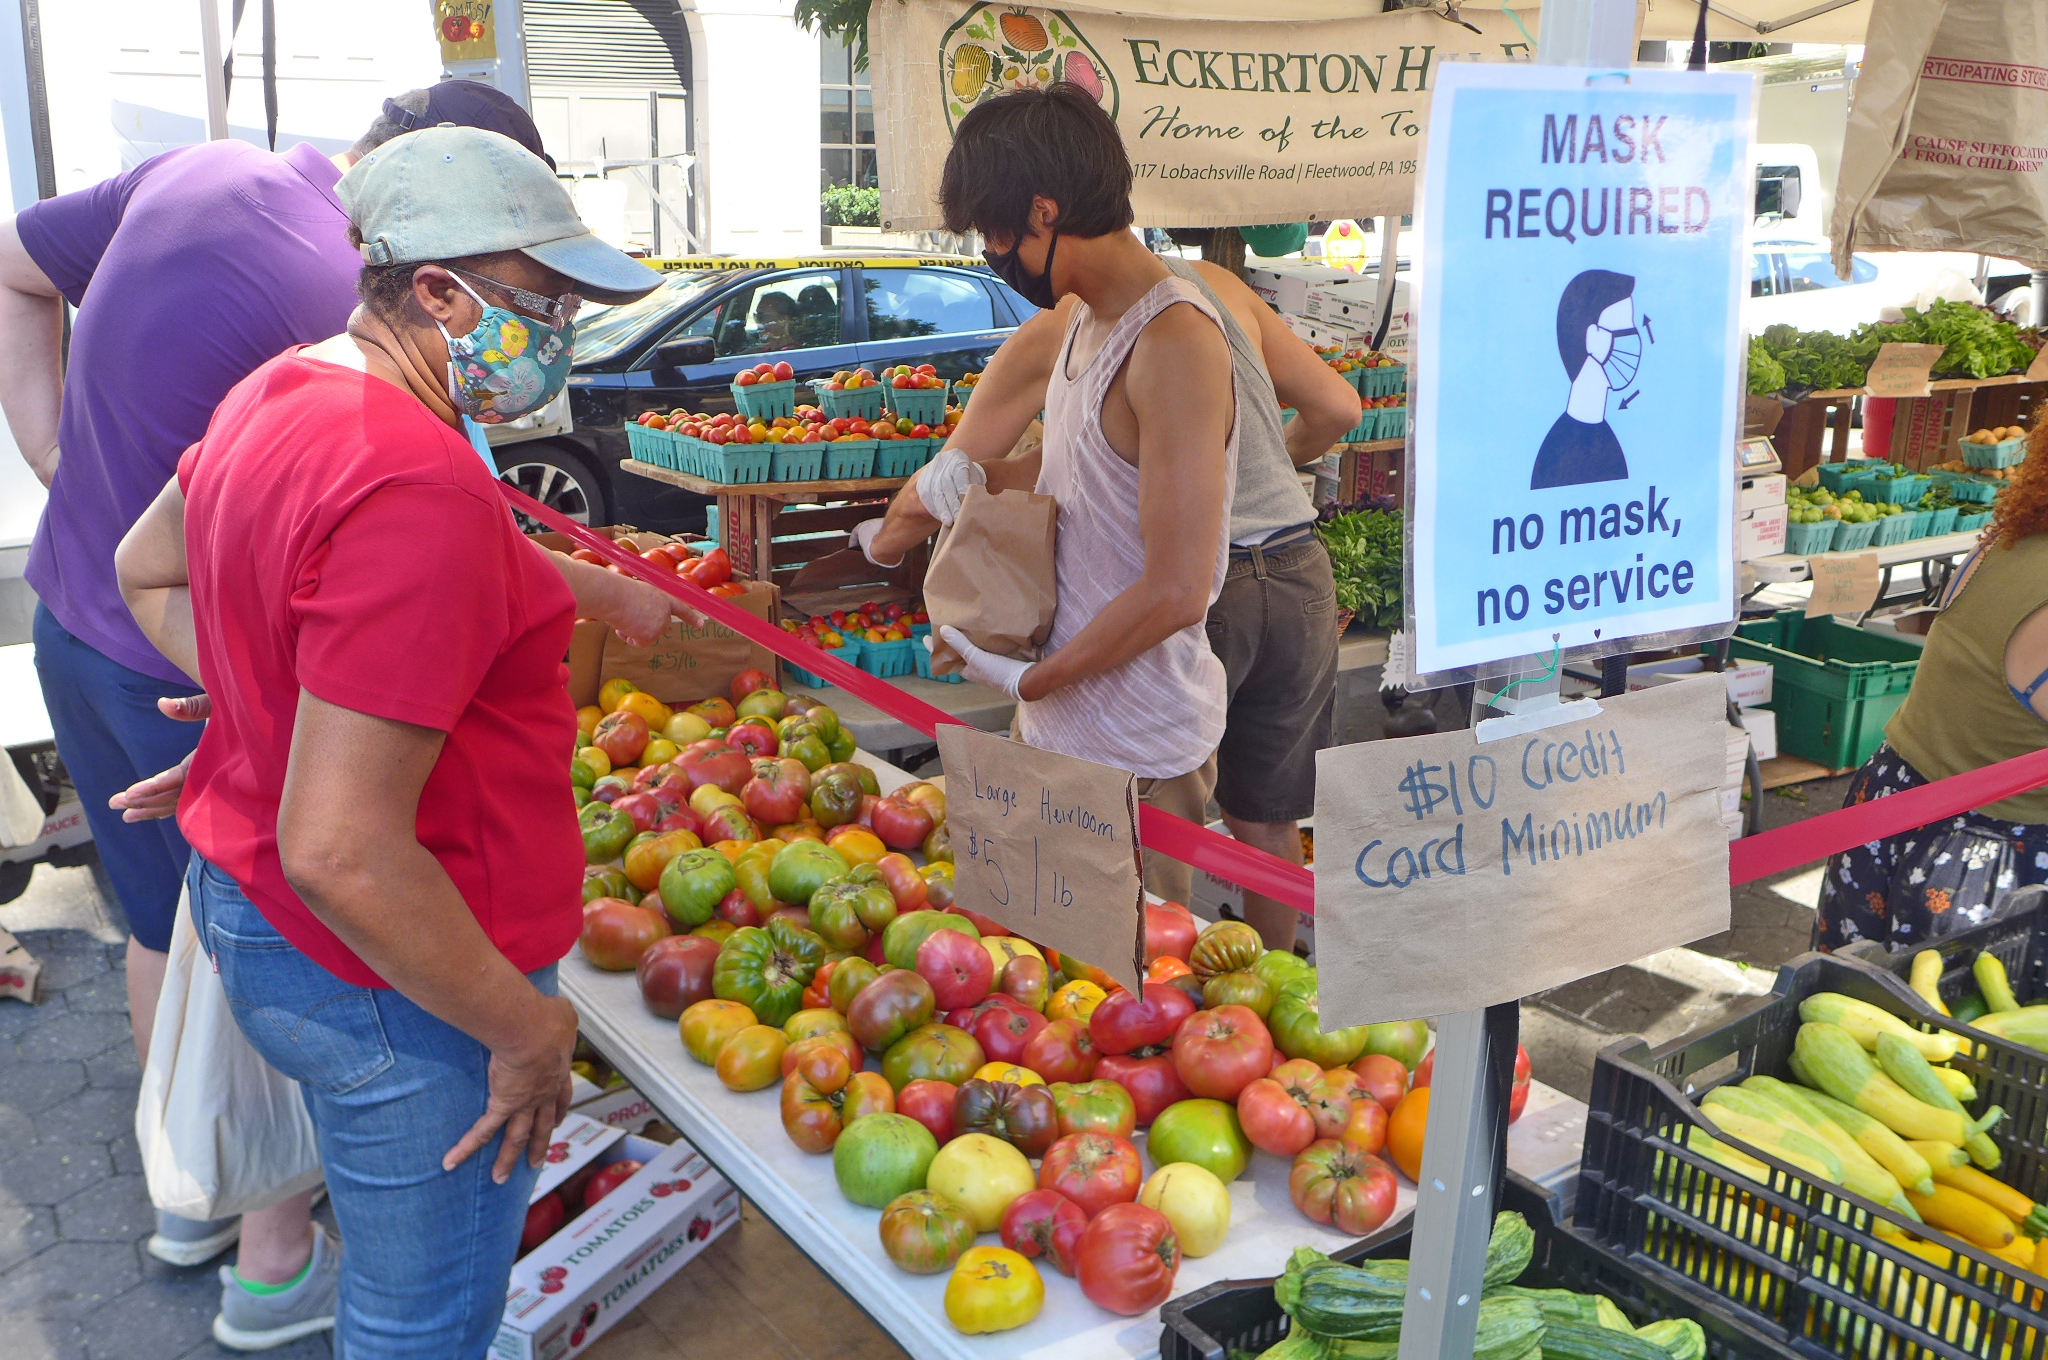 A woman in a baseball cap looks over the many varieties of heirloom tomatoes.